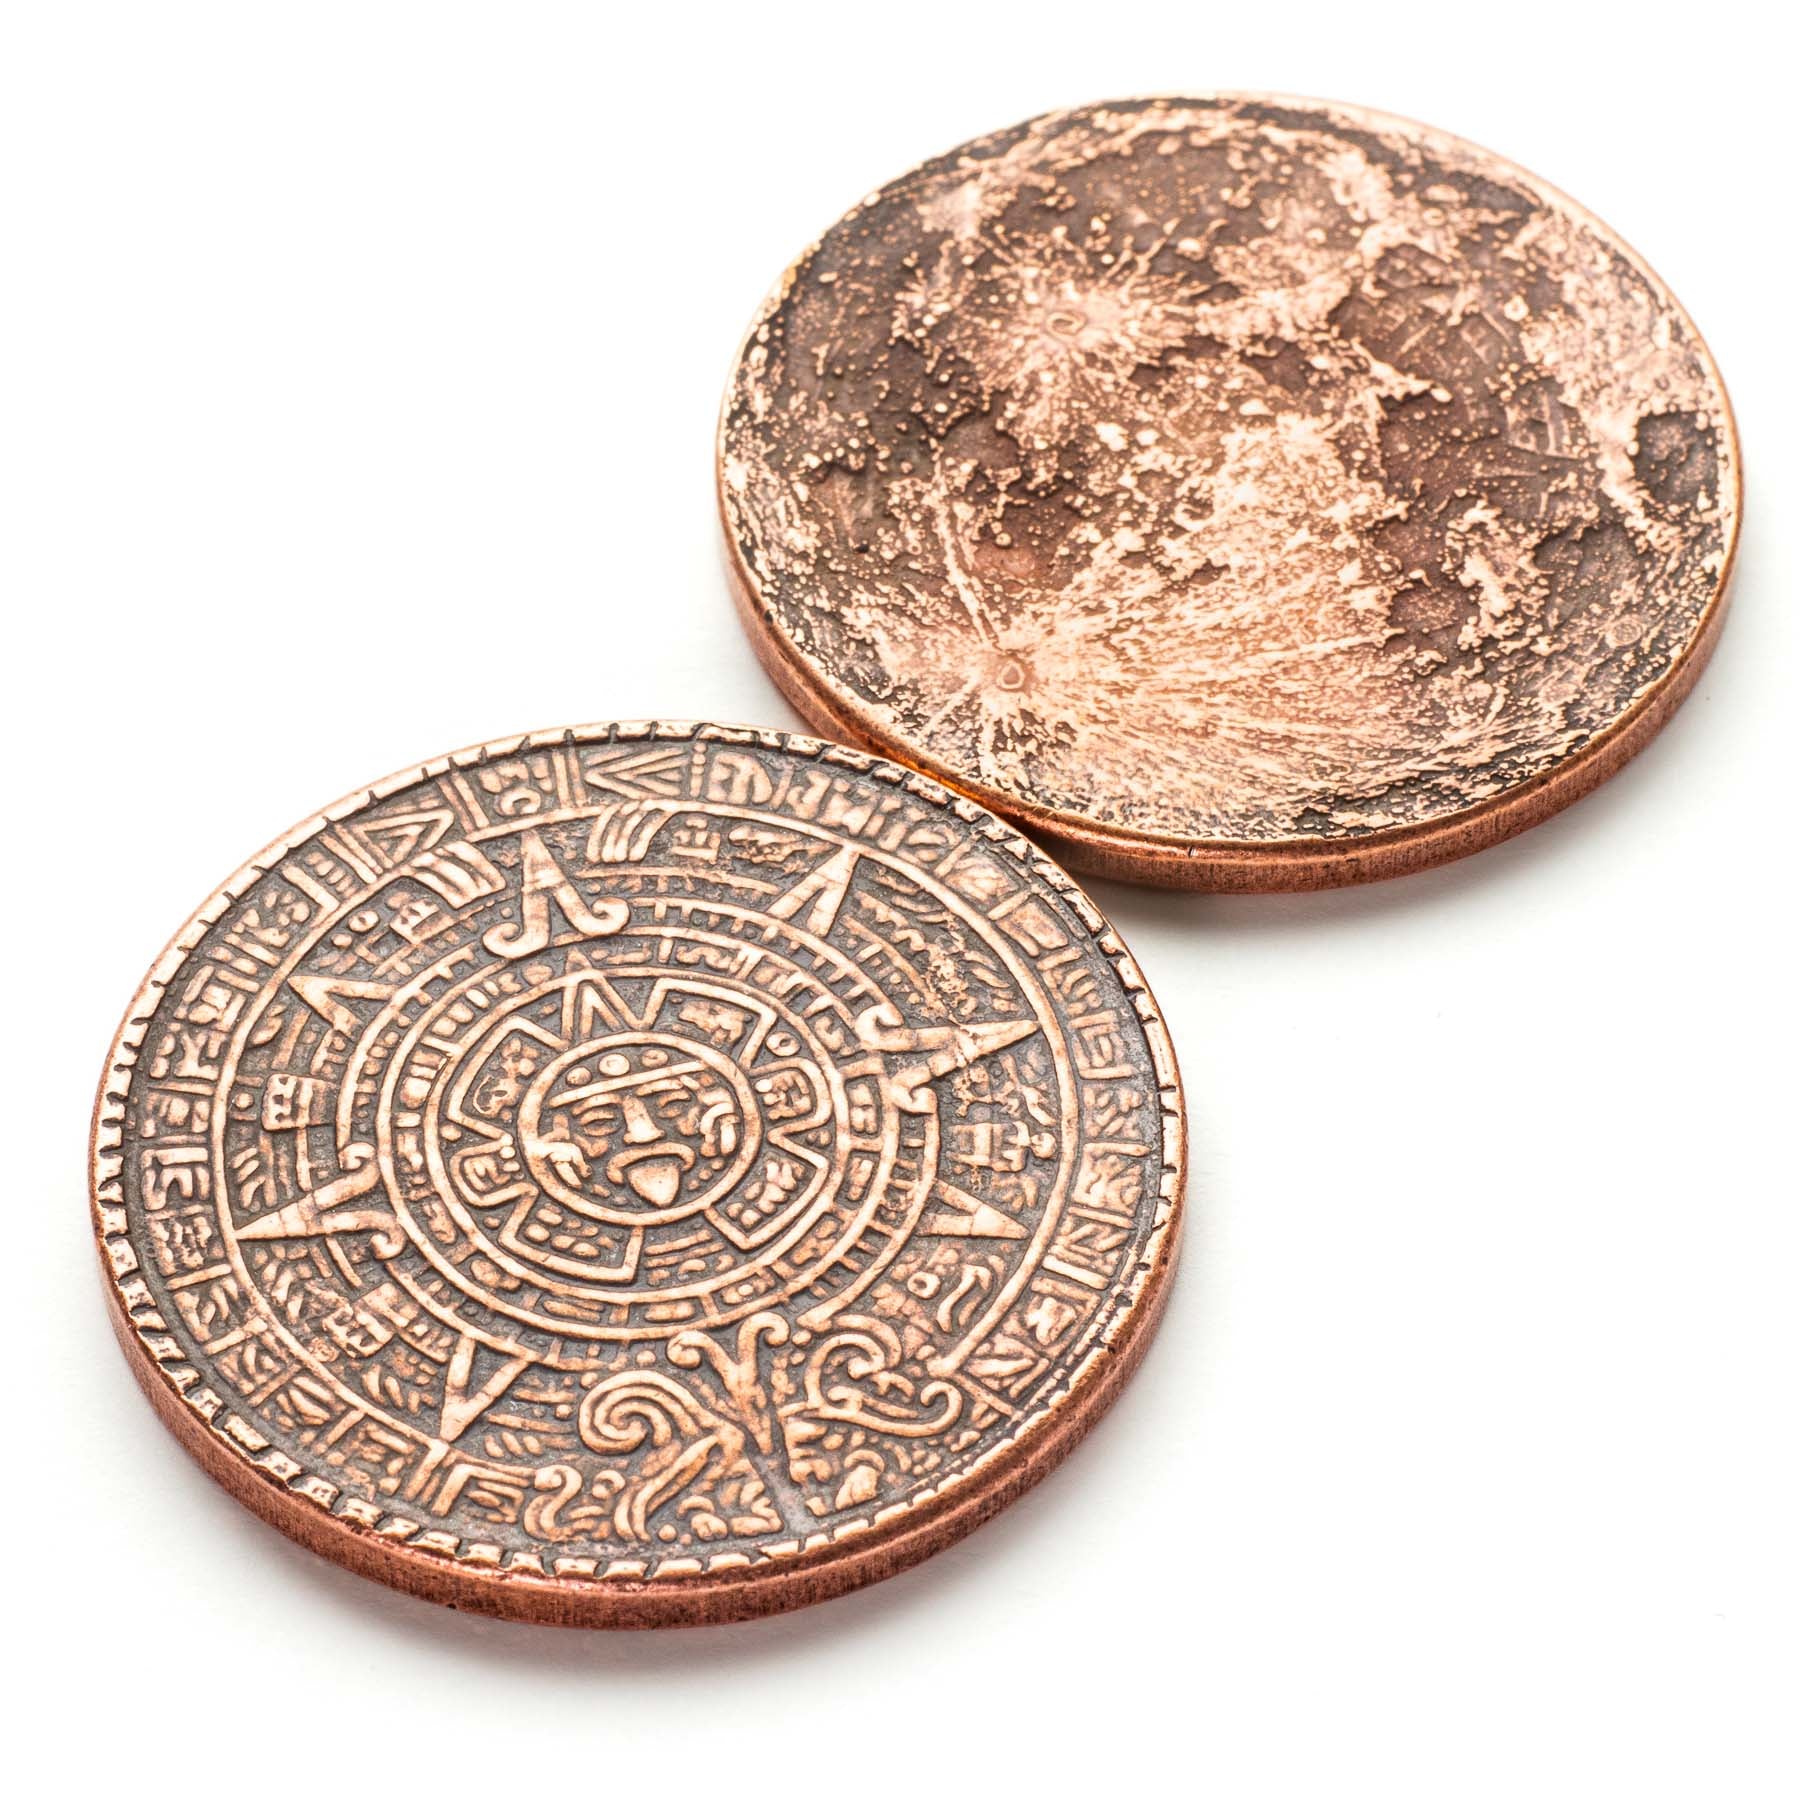 Sun and Moon Copper Coin Aztec Calendar Worry Coin | Shire Post Mint